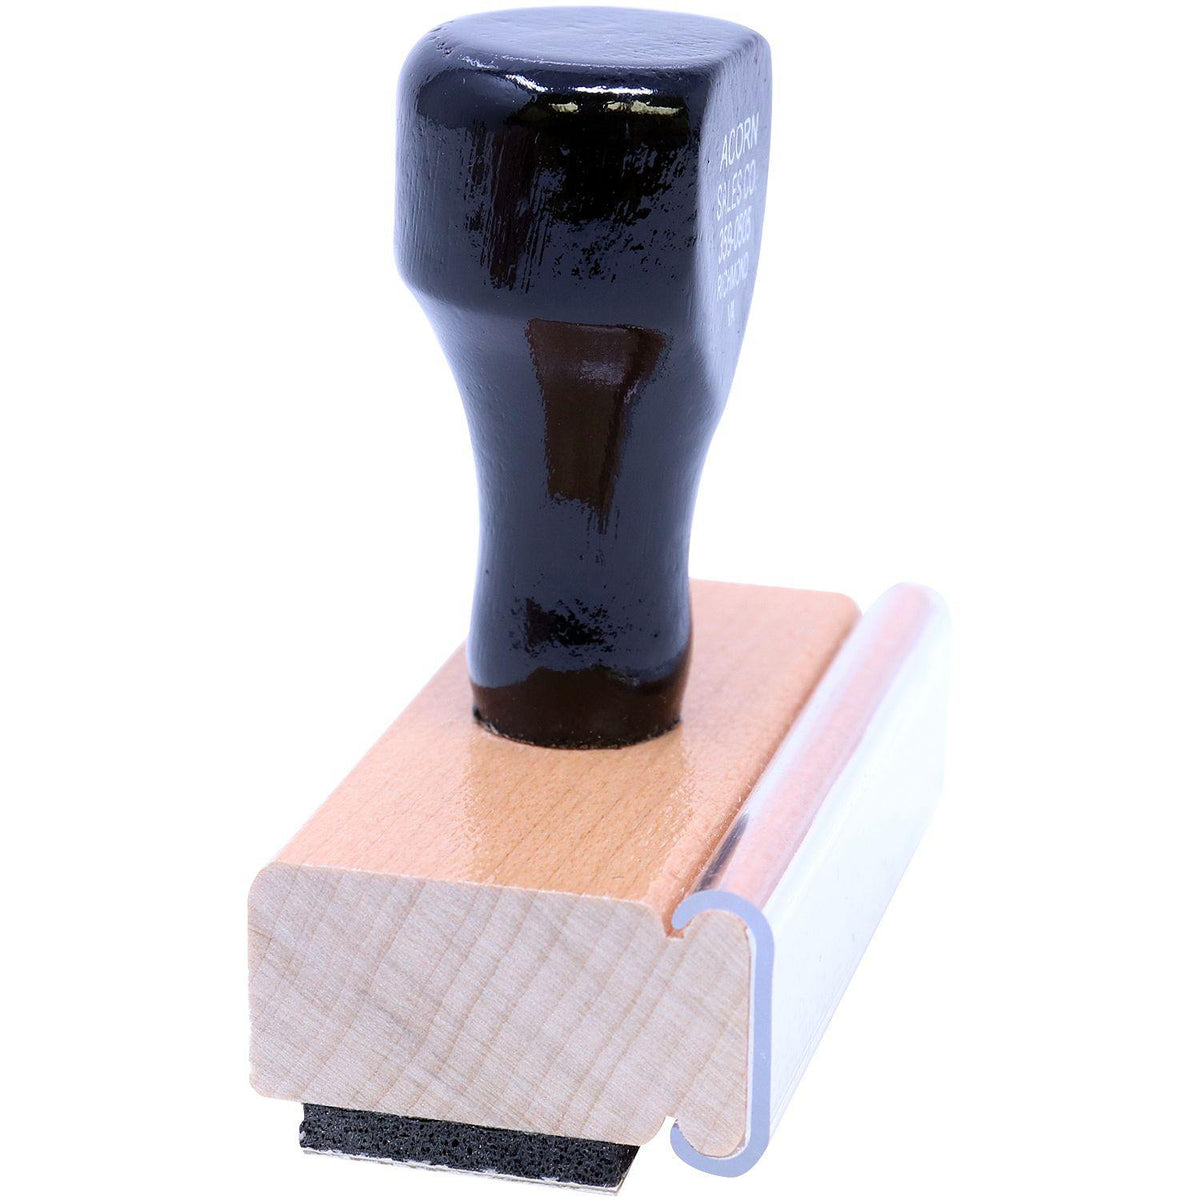 Side View of This belongs to ... Rubber Stamp at an Angle